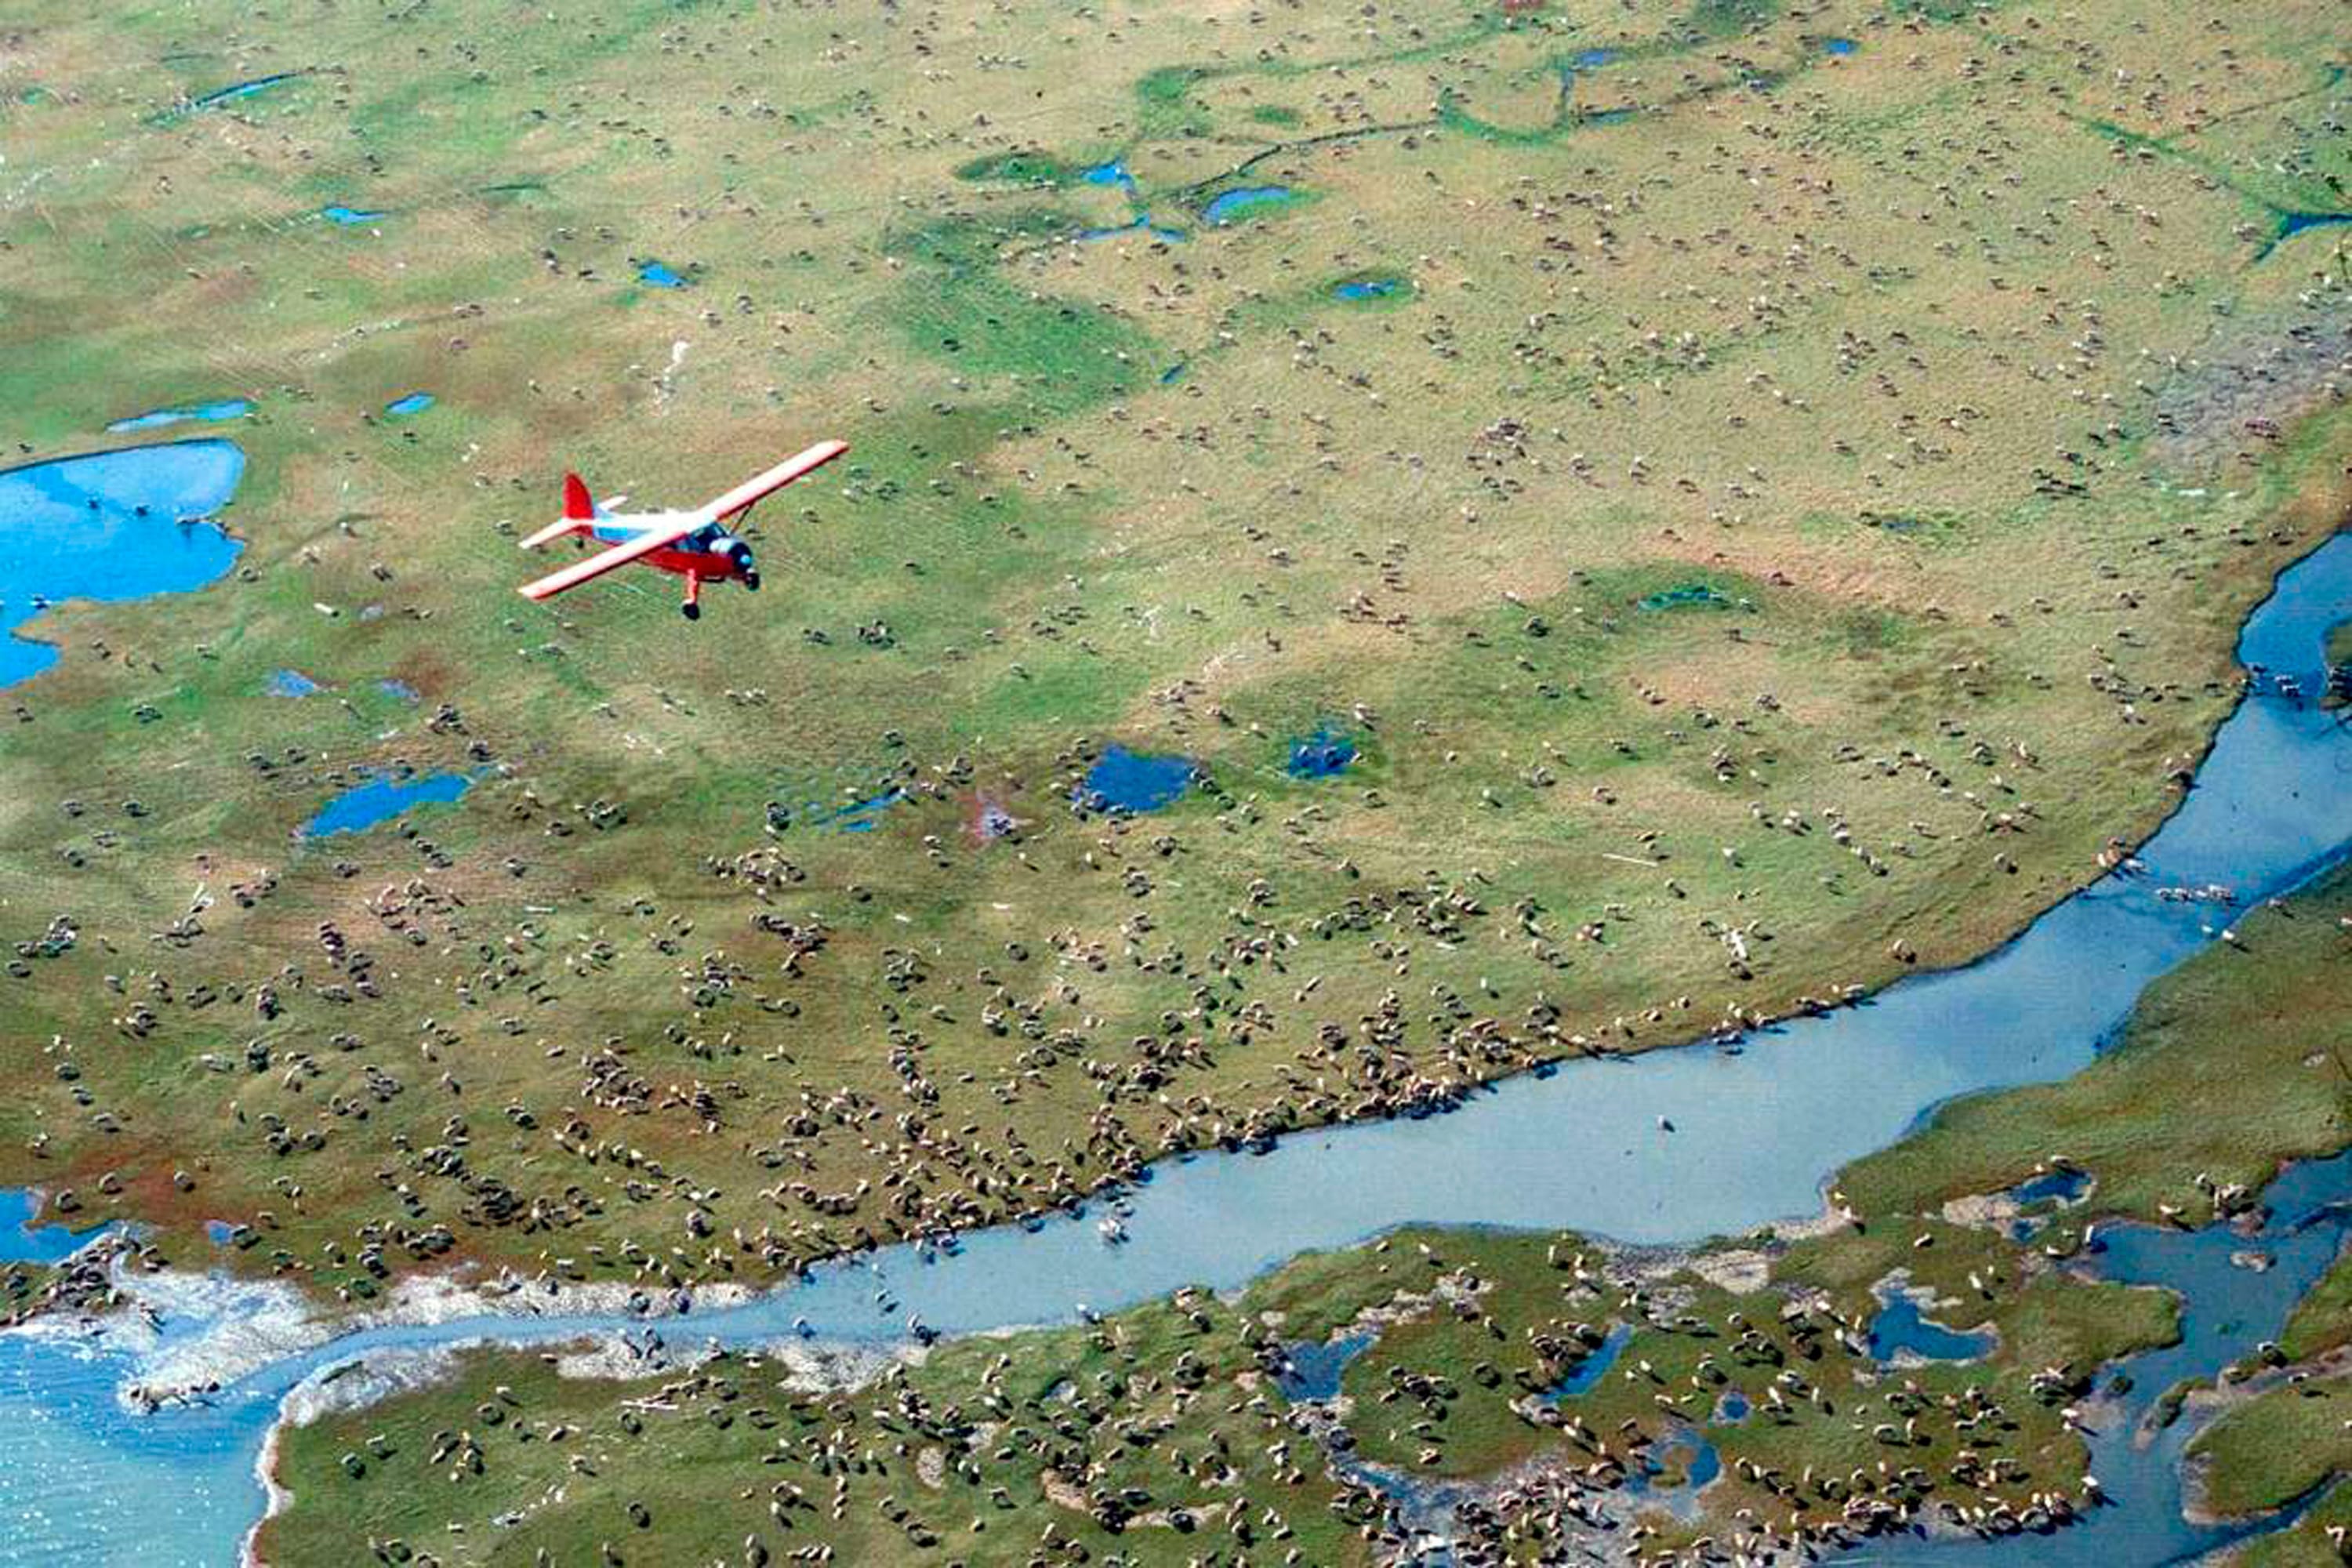 In this undated photo provided by the U.S. Fish and Wildlife Service, an airplane flies over caribou from the Porcupine Caribou Herd on the coastal plain of the Arctic National Wildlife Refuge in northeast Alaska. The Trump administration is moving toward oil and gas drilling in Alaska's Arctic National Wildlife Refuge. A notice being published Friday, April 20, 2018, in the Federal Register starts a 60-day review to sell oil and gas leases in the remote refuge. Oil and gas drilling in the pristine area in northeastern Alaska is a longtime Republican priority that most Democrats fiercely oppose. (U.S.